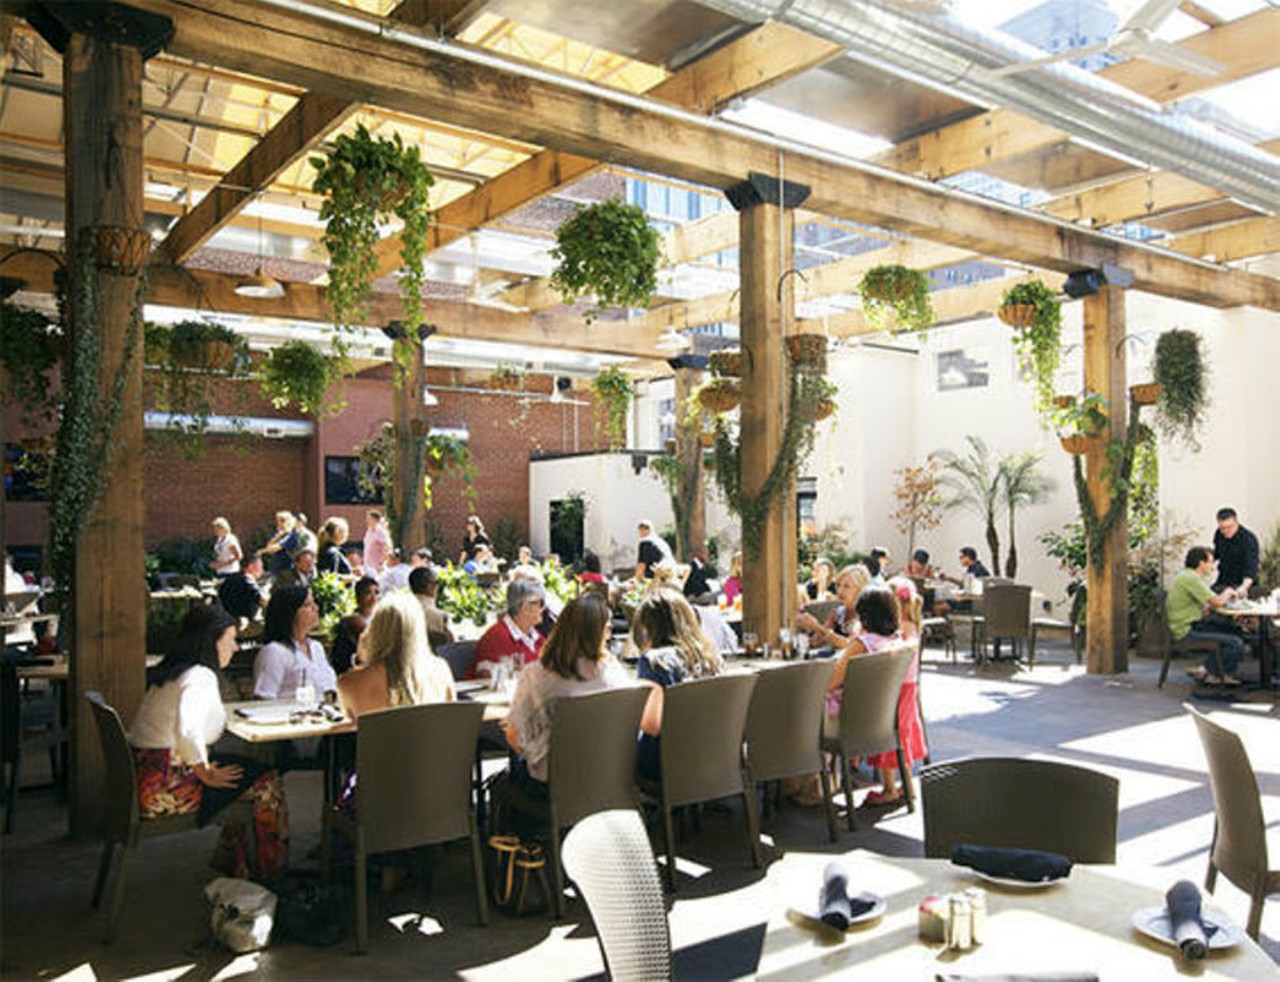 Copia Restaurant & Wine Garden
Who says you have to sacrifice sunshine and open air when you eschew an honest-to-goodness winery for a wine bar in the city? The garden at Copia Restaurant & Wine Garden (1122 Washington Avenue, 314-241-9463) has a retractable roof, making it accessible year-round. The walls provide a rare bit of privacy in the heart of downtown, while you'll still get the dose of sunshine and fresh air you desire. Photo by Jennifer Silverberg.